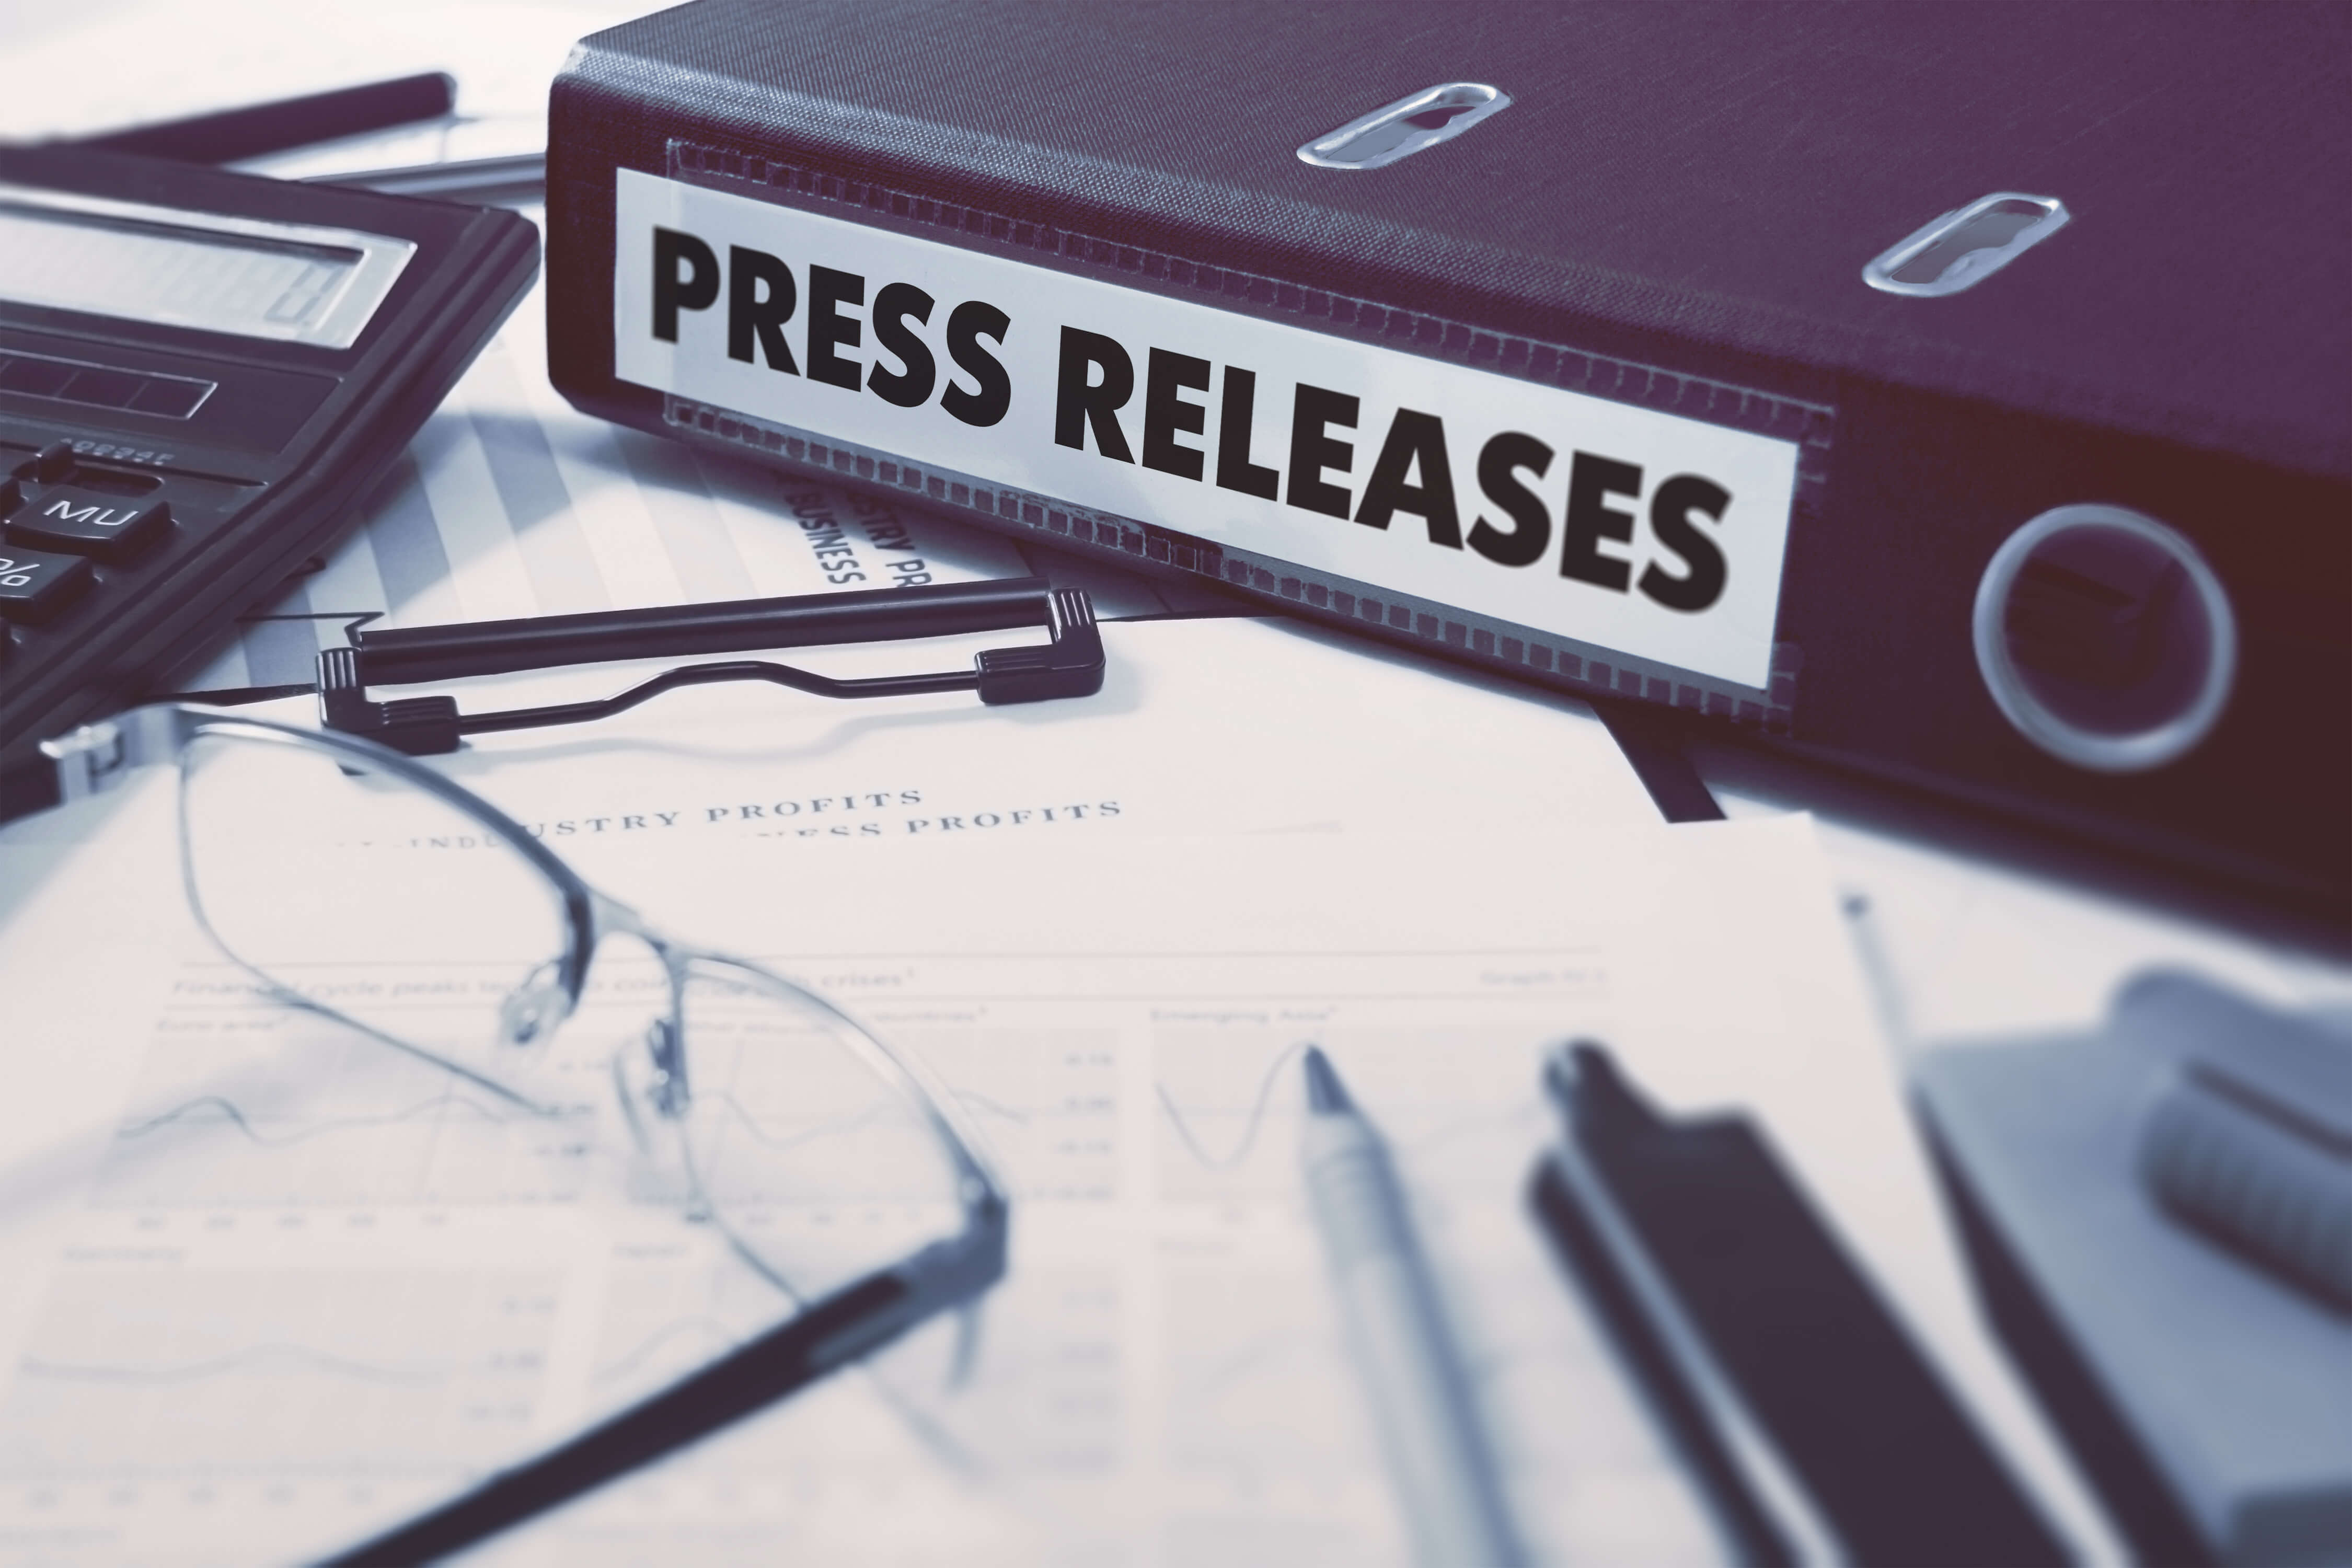 Press release template, How to write a press release, Guide to writing a press release